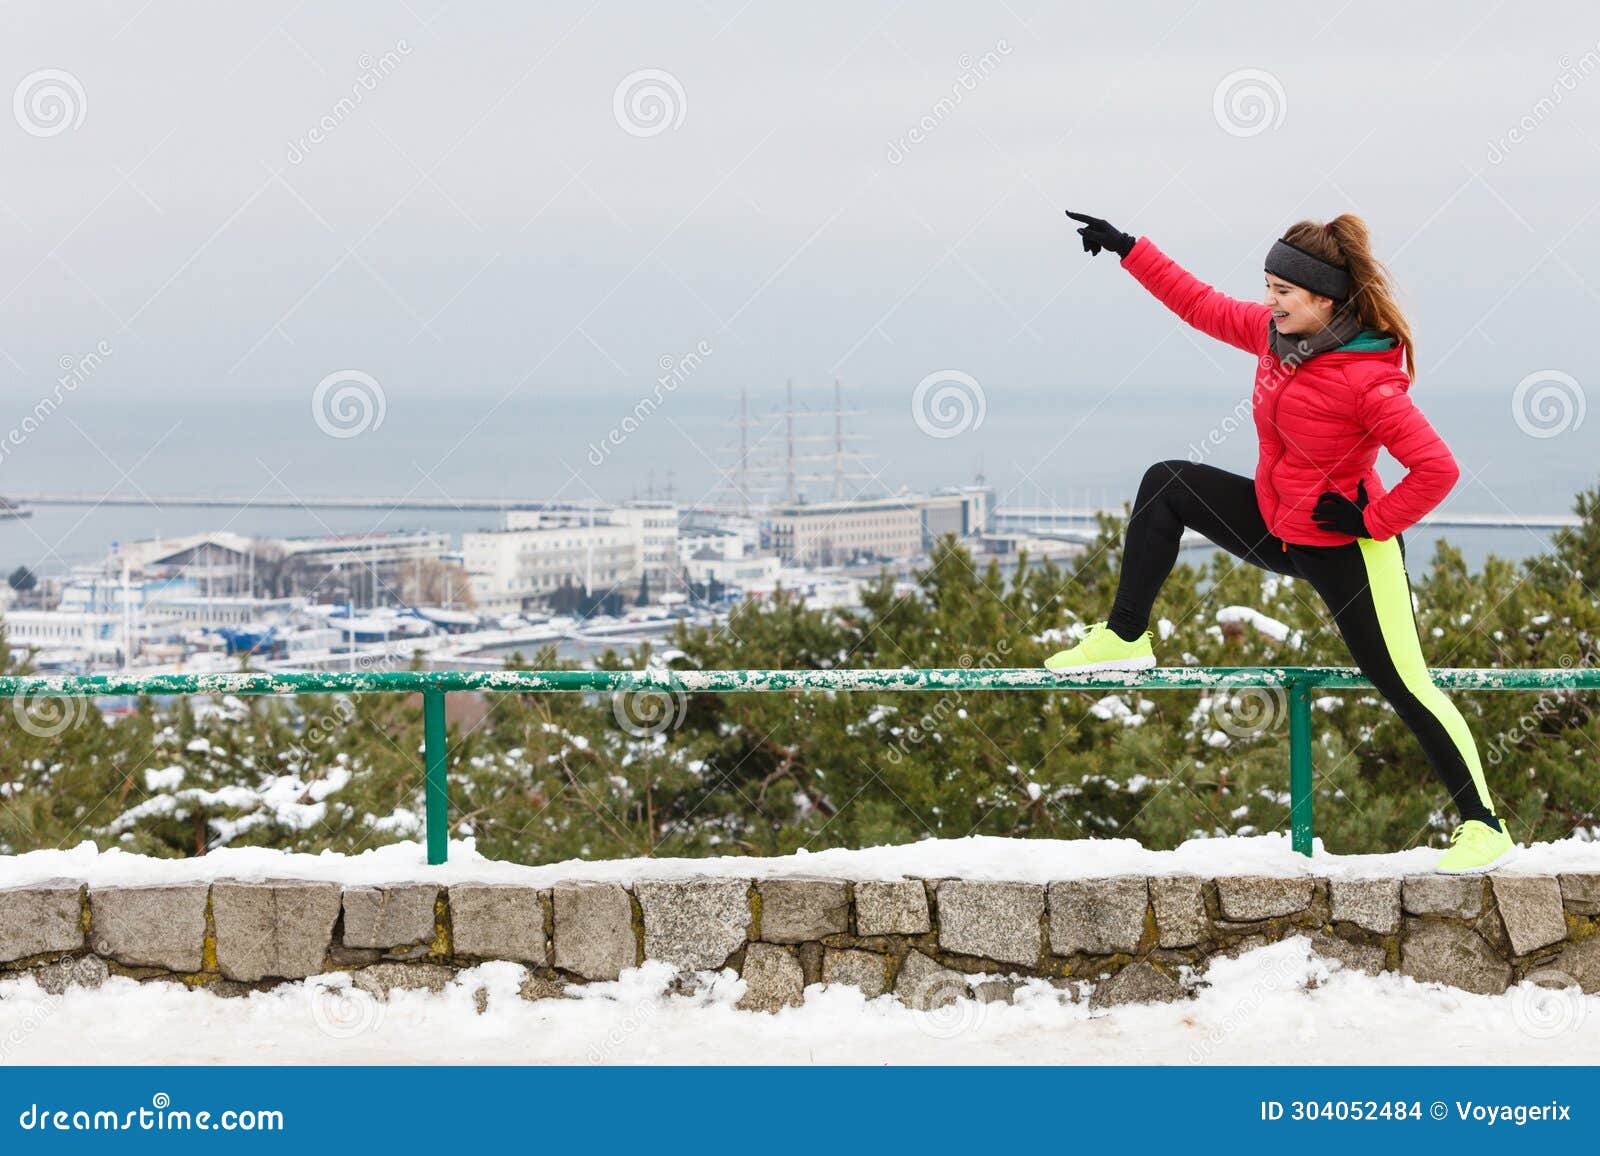 Outdoor Sport Exercises, Sporty Outfit Ideas. Woman Wearing Warm